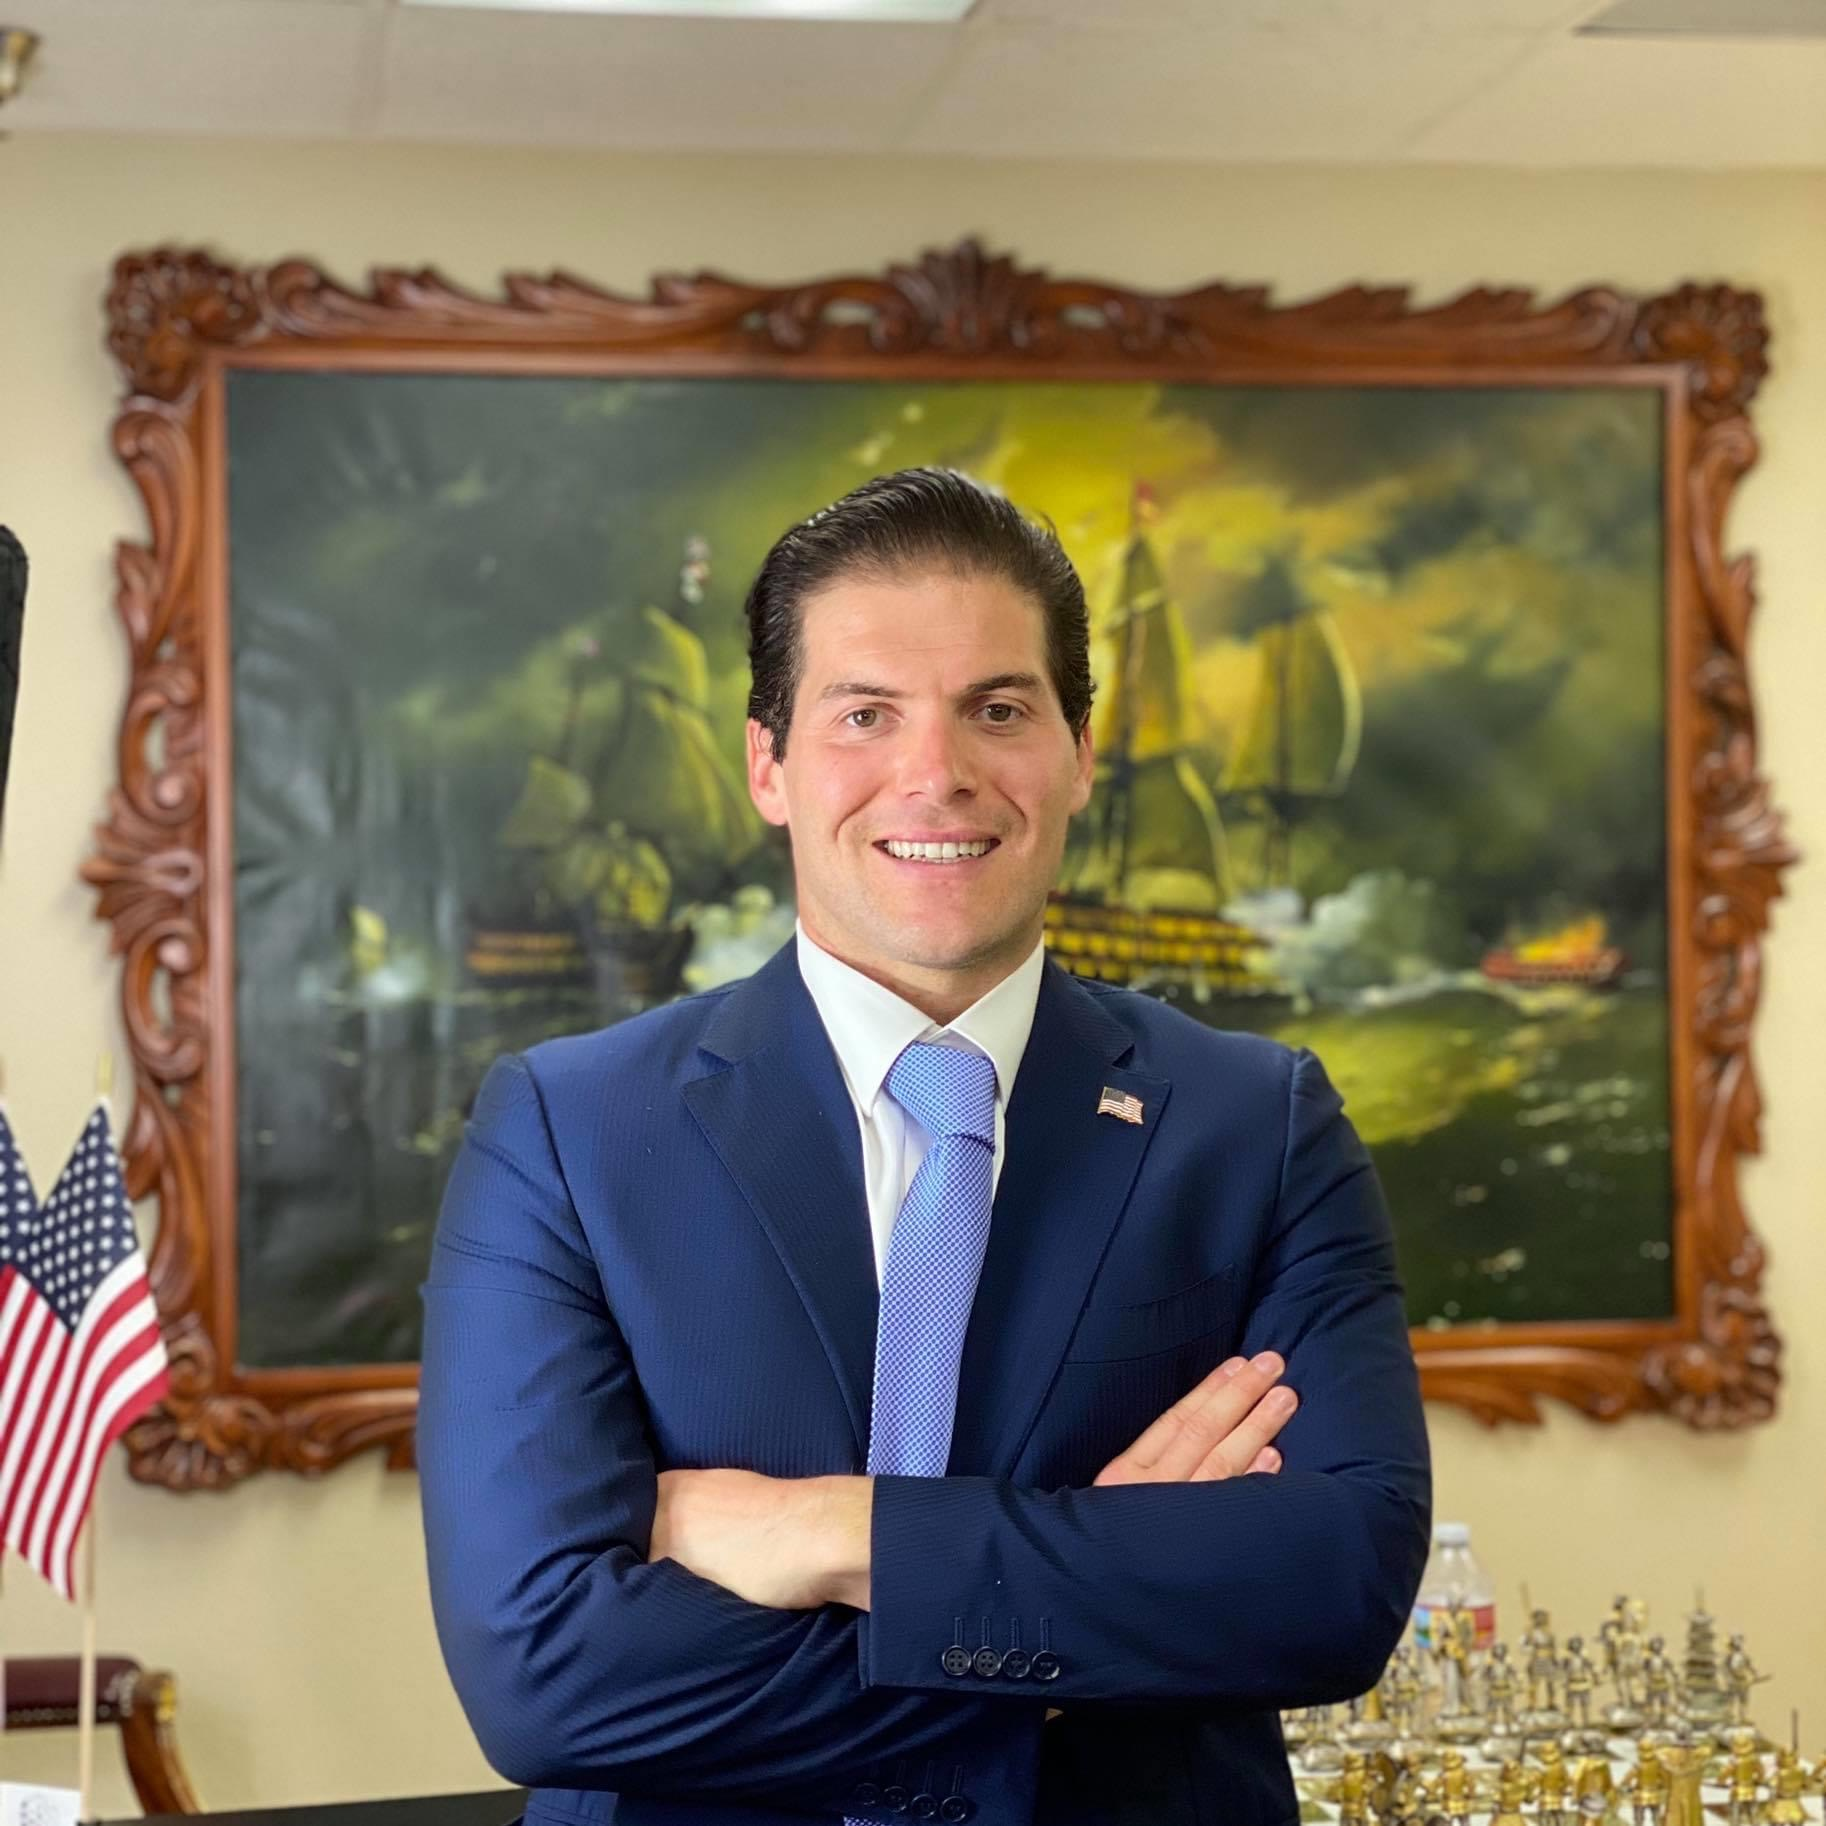 Ricardo For Congress, Tuesday, June 30, 2020, Press release picture